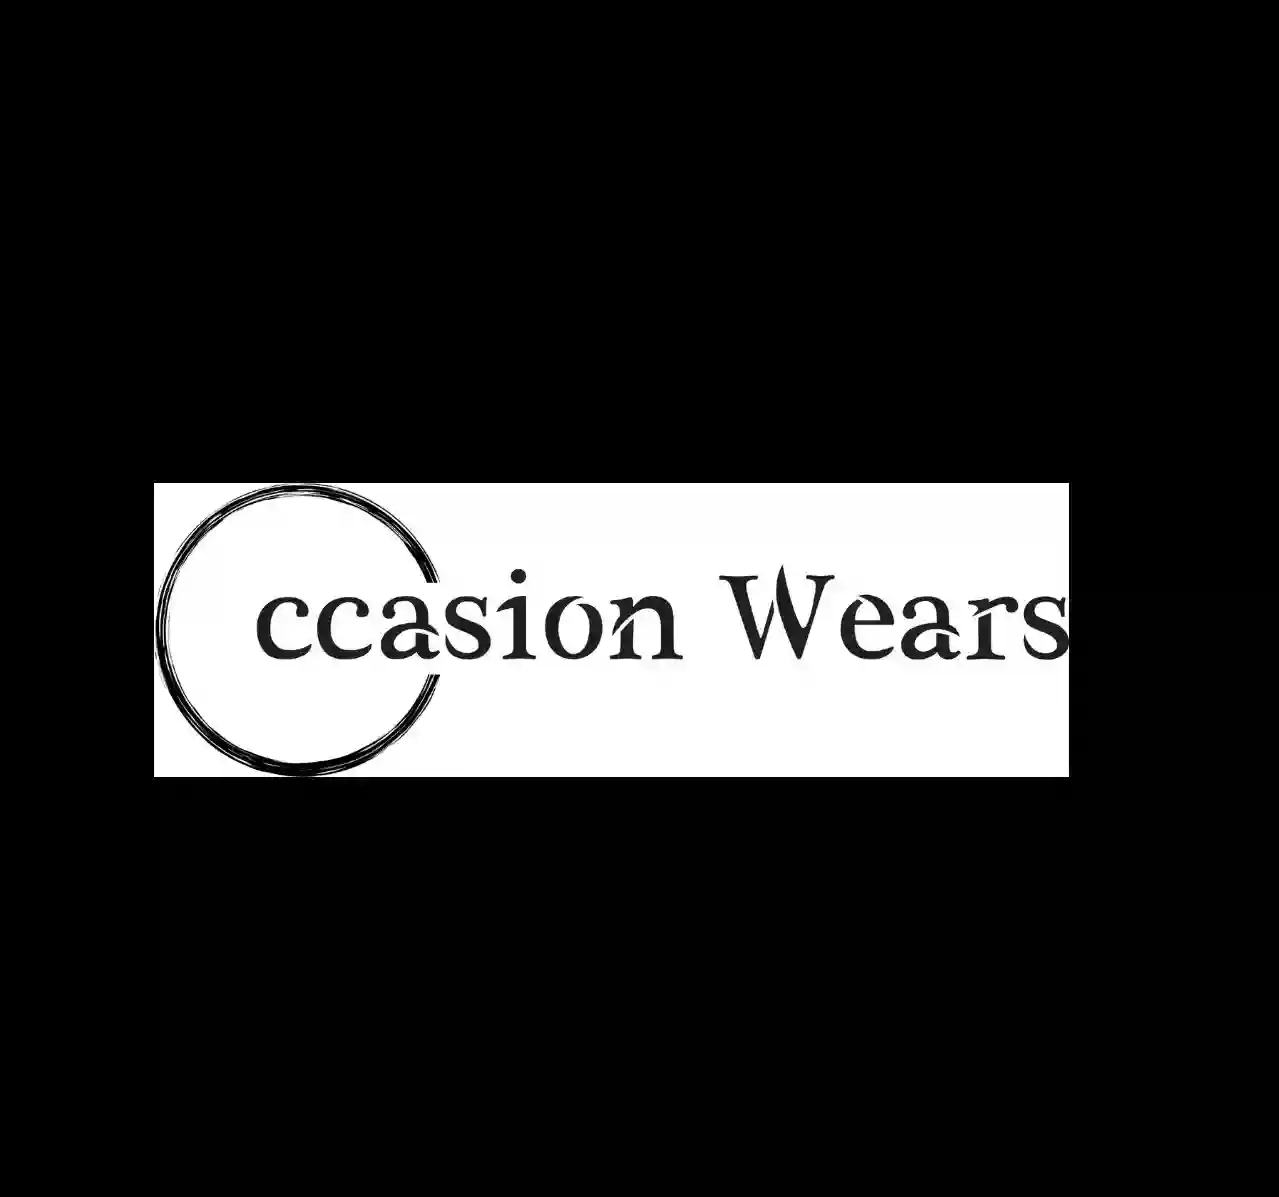 Occasion Wears